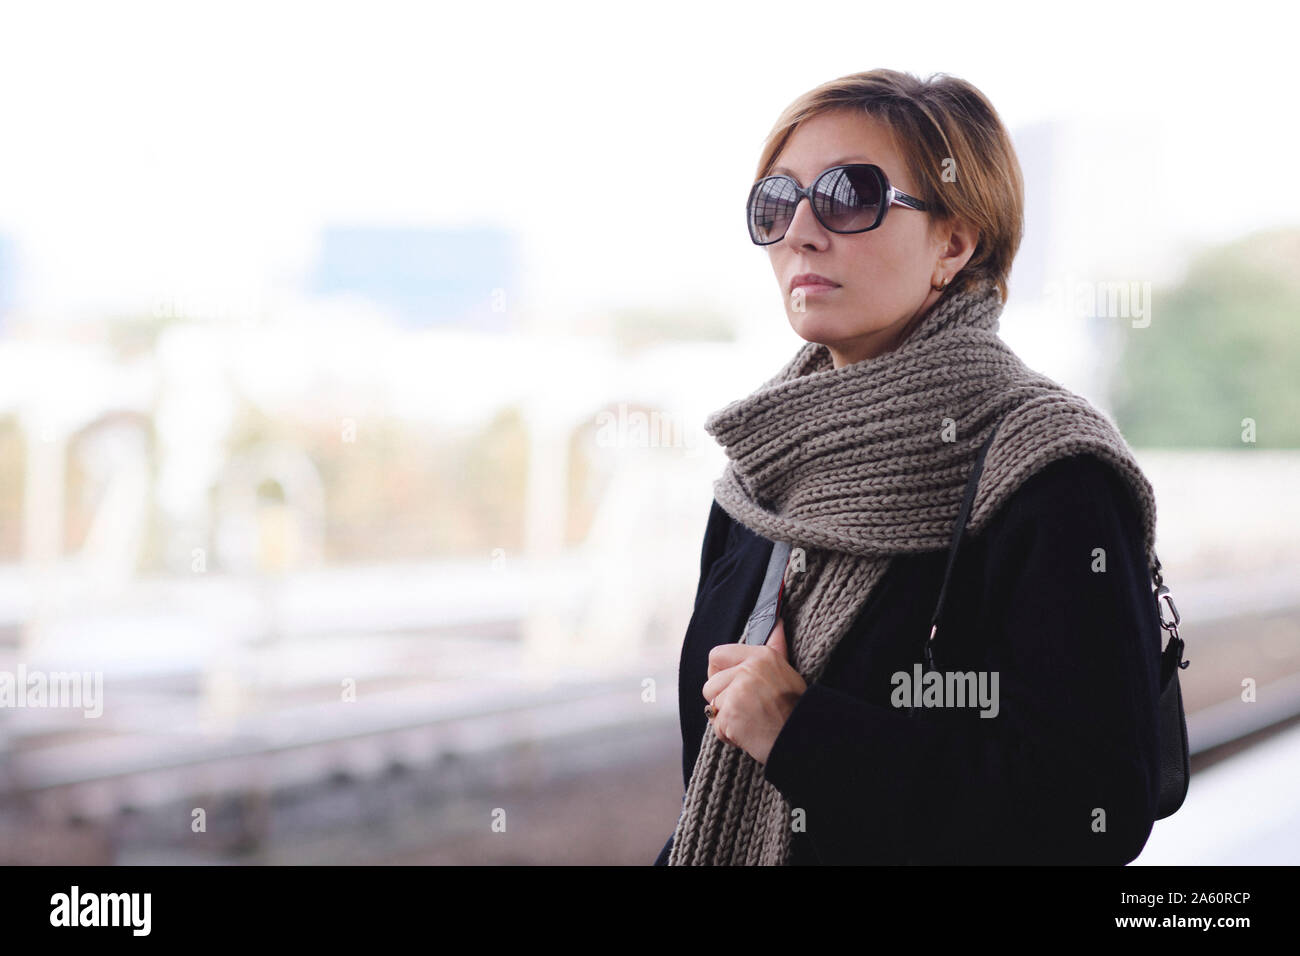 Mature woman with sunglasses wearing black coat and wool scarf waiting at platform Stock Photo